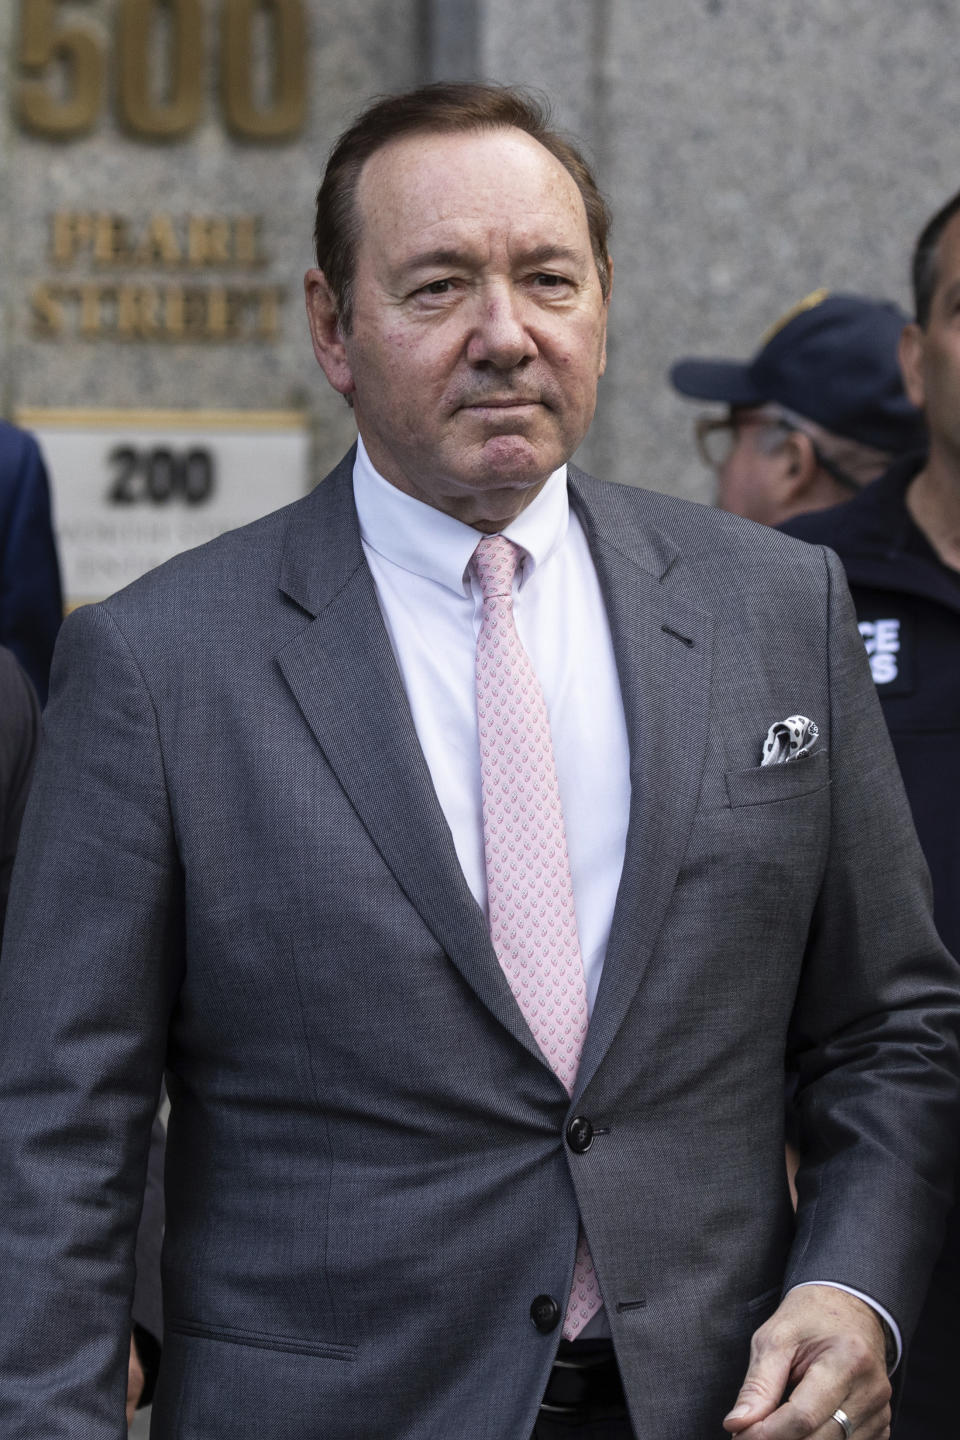 Actor Kevin Spacey leaves court, Monday, Oct. 17, 2022, in New York. Spacey testified that he never made a sexual pass at the actor Anthony Rapp, who has sued, claiming the Academy Award-winning actor tried to take him to bed when he was 14. (AP Photo/Yuki Iwamura)